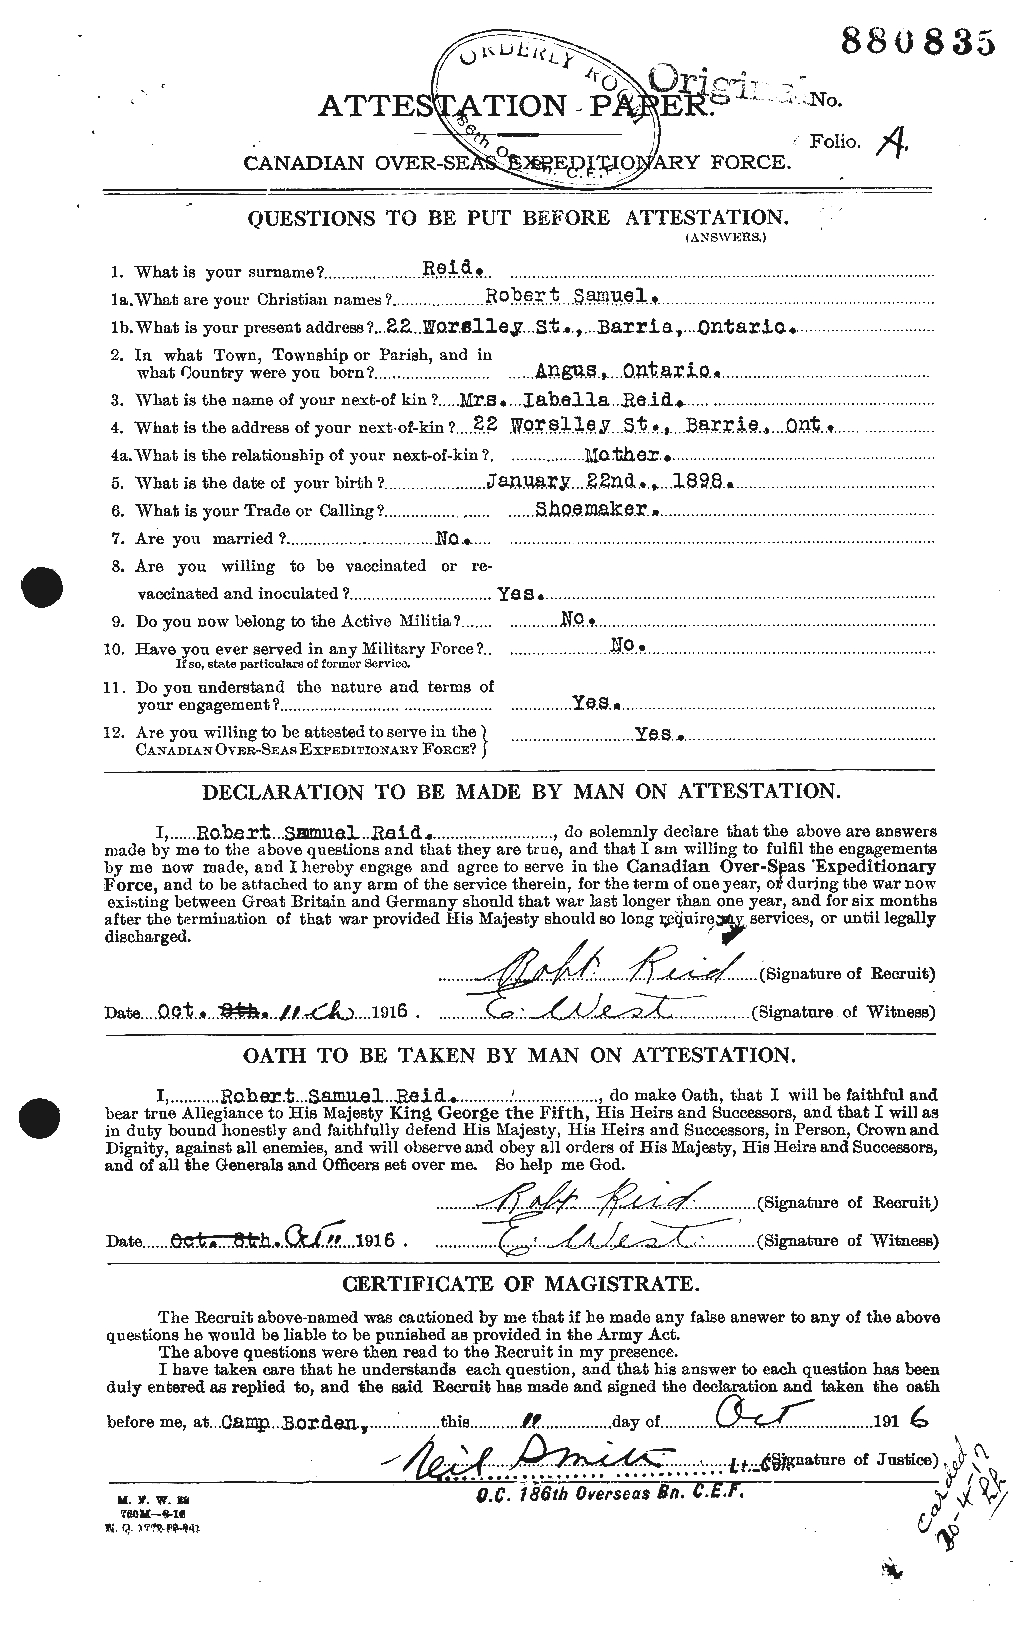 Personnel Records of the First World War - CEF 601921a